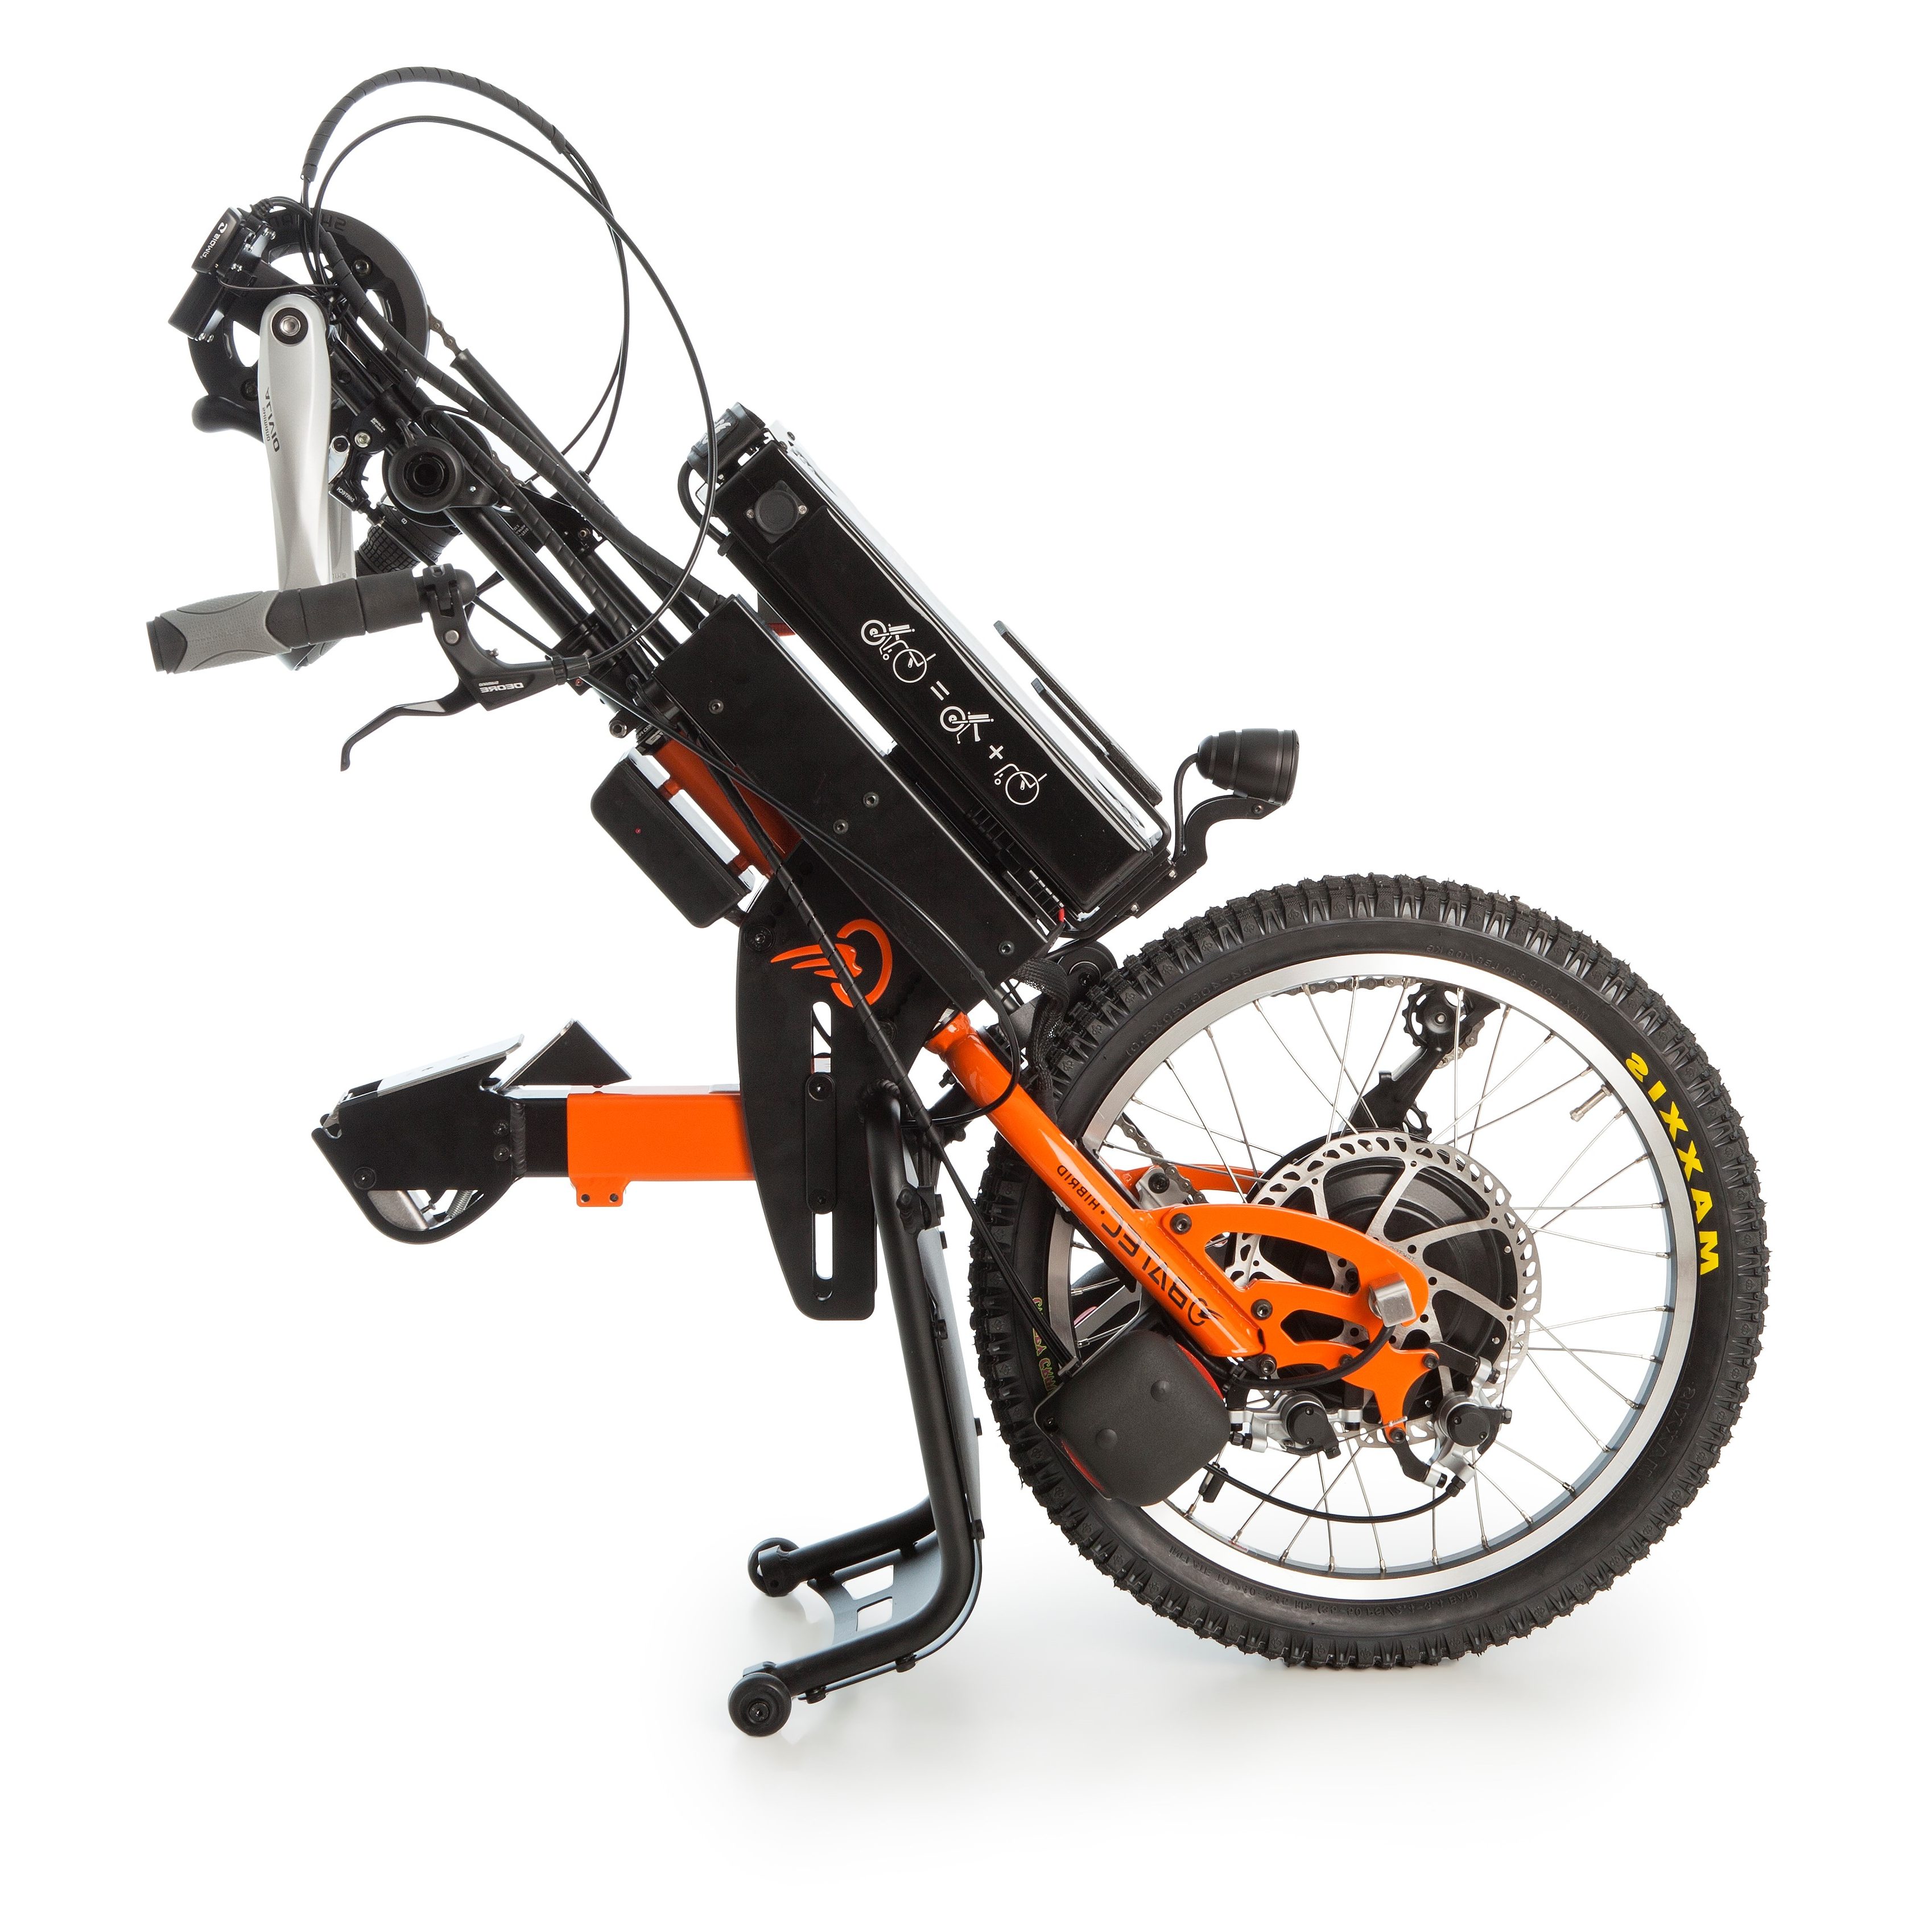 The Batec Hybrid add-on handbike, brings together the technology of the Batec Electric and the Batec Manual handbikes, to offer the equivalent of an electrically assisted bike.